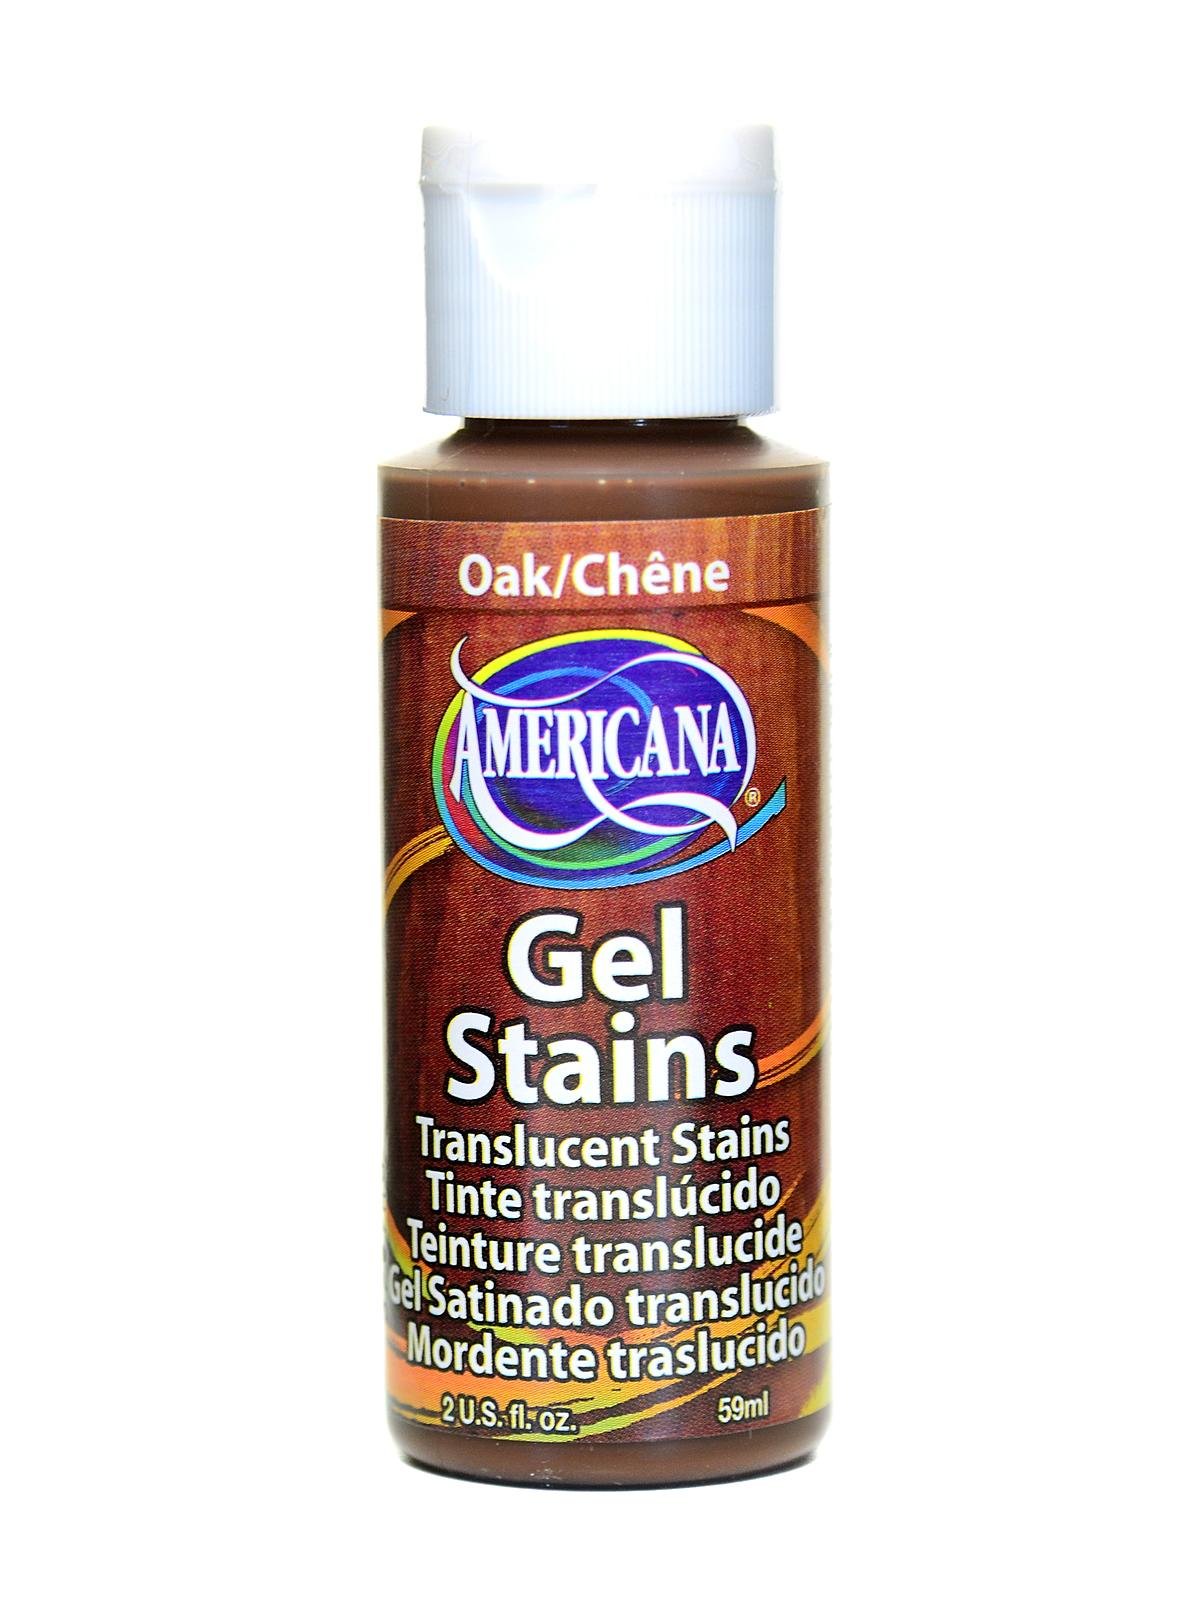 Americana Gel Stain Wood Stain Paint 3-Pack, Wood Tint Colors Walnut, Oak, Maple, 2-Ounce, with Foam Brushes for Gel Stain Paint, Brown